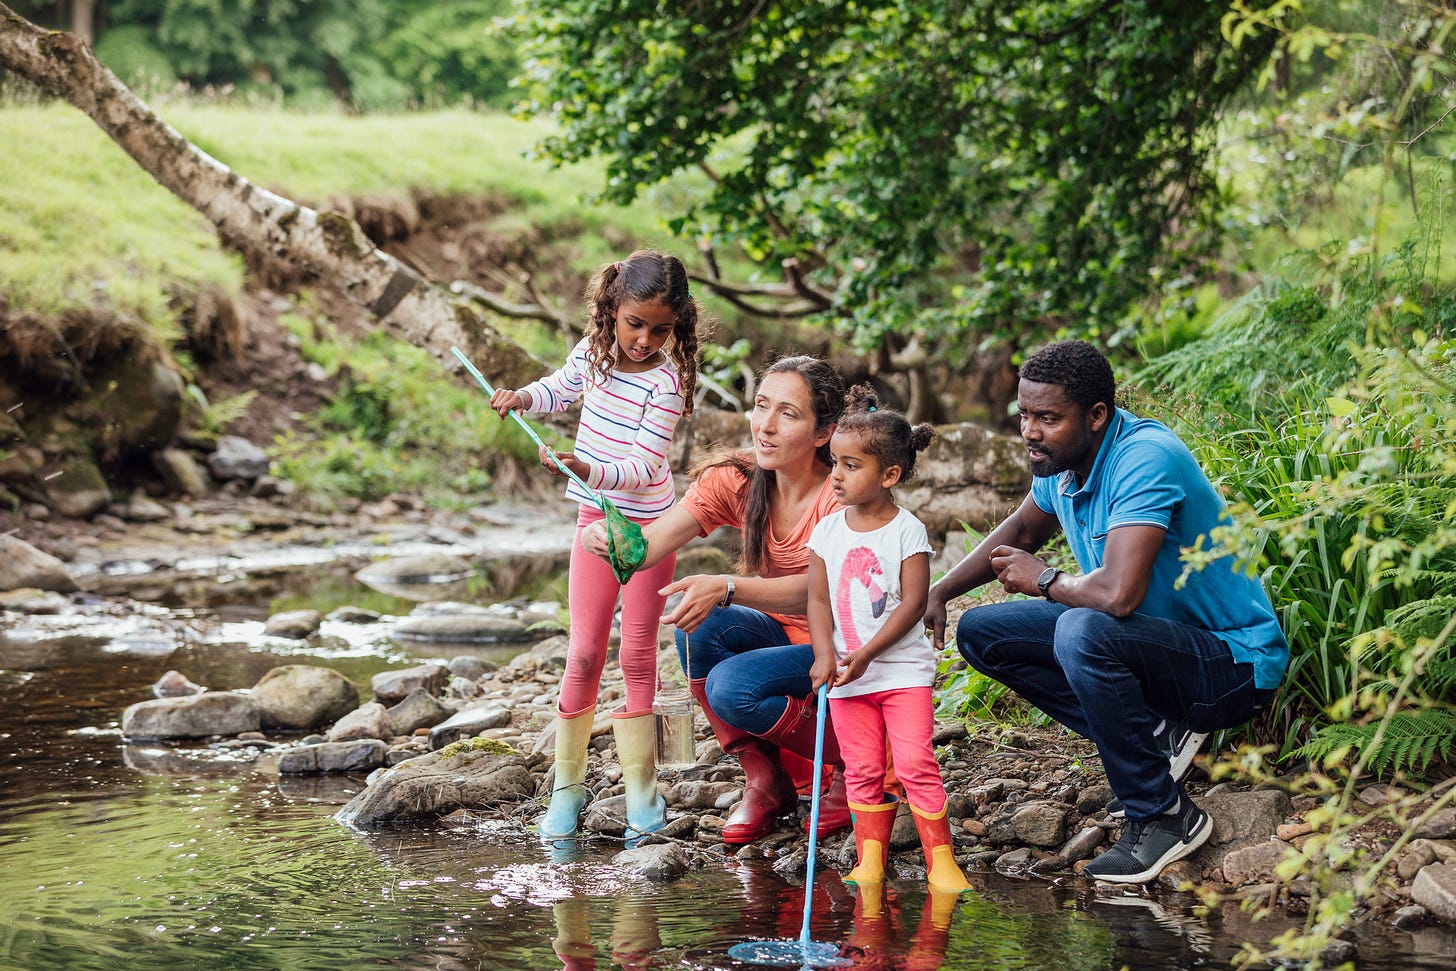 A man and woman teaching two young girls about the environment and nature in a creek